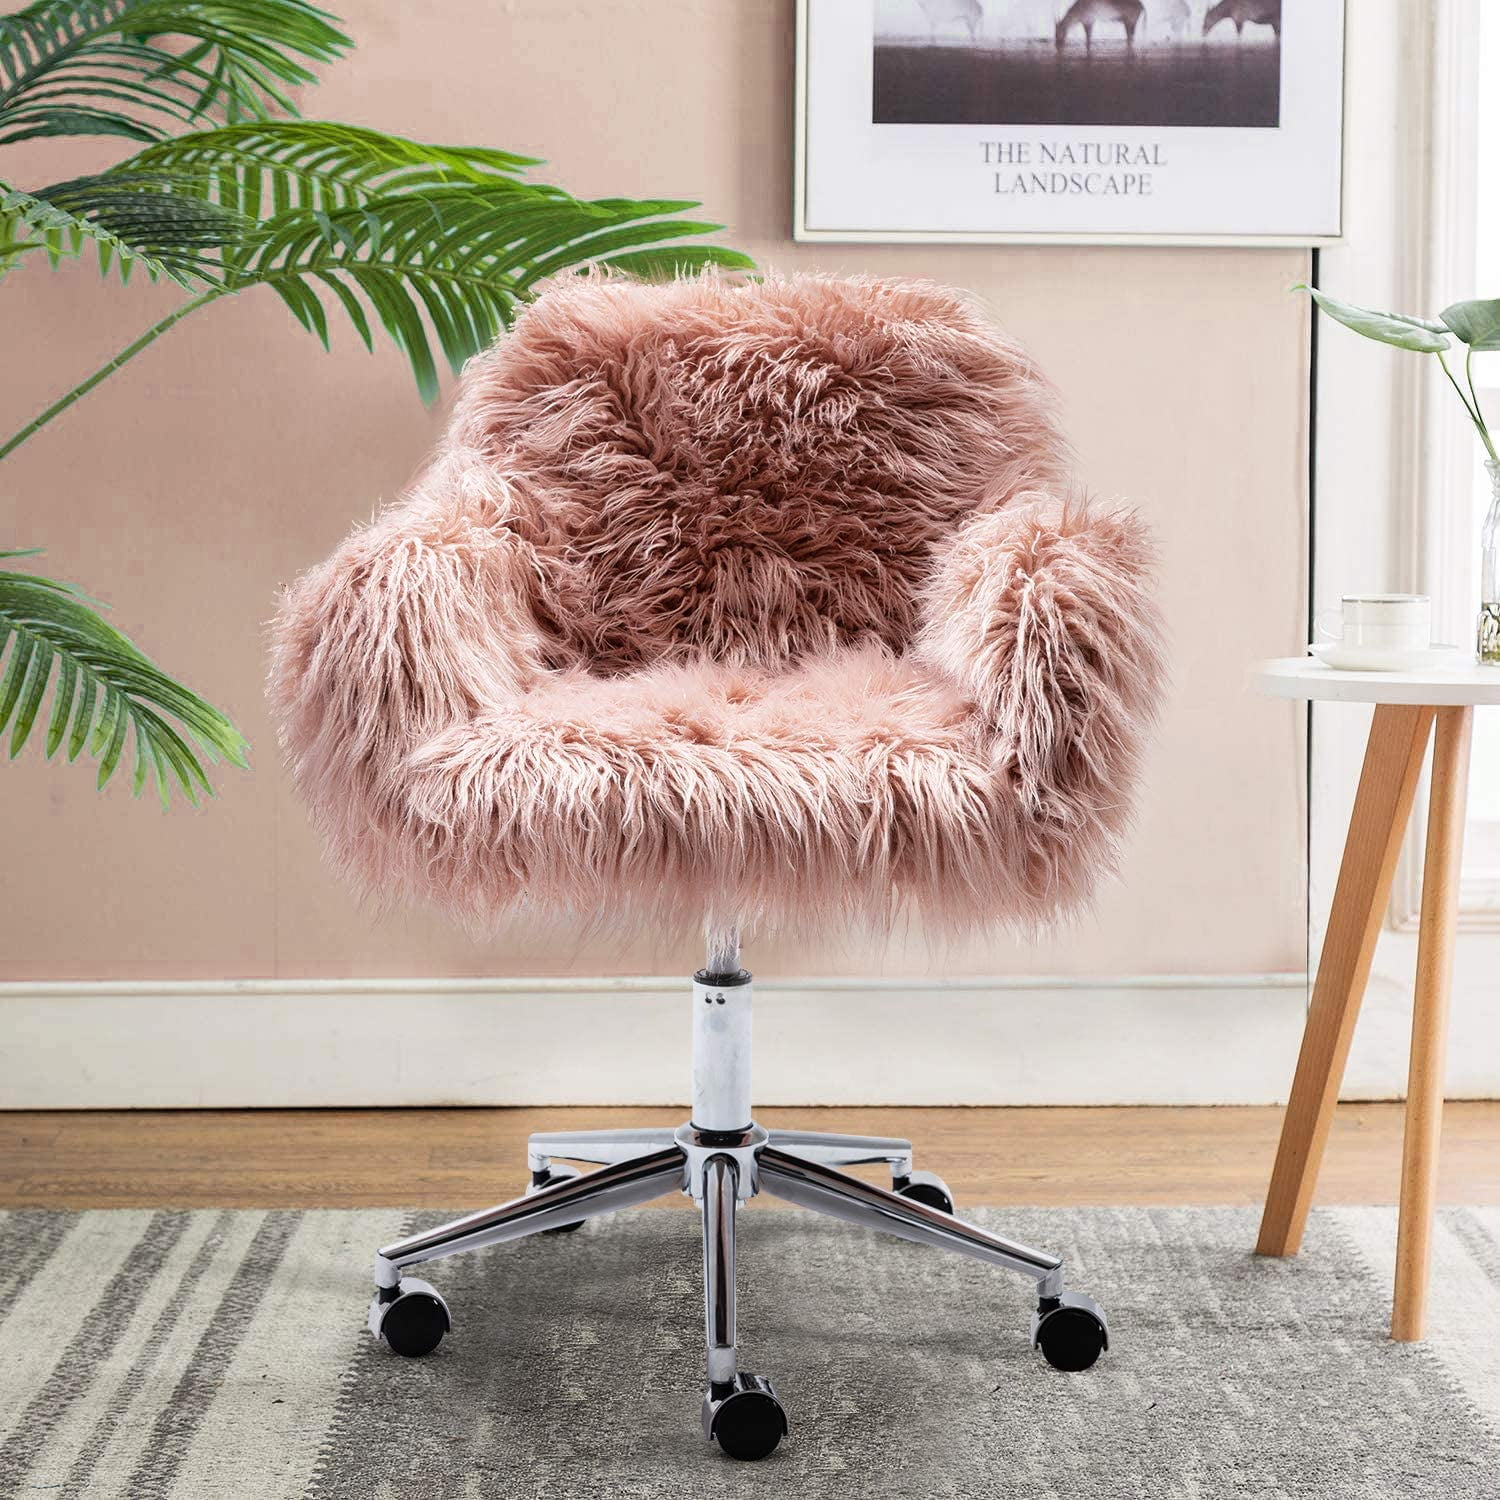 Vanity Chairs with Backs, Cute Fluffy Upholstered Padded Seat